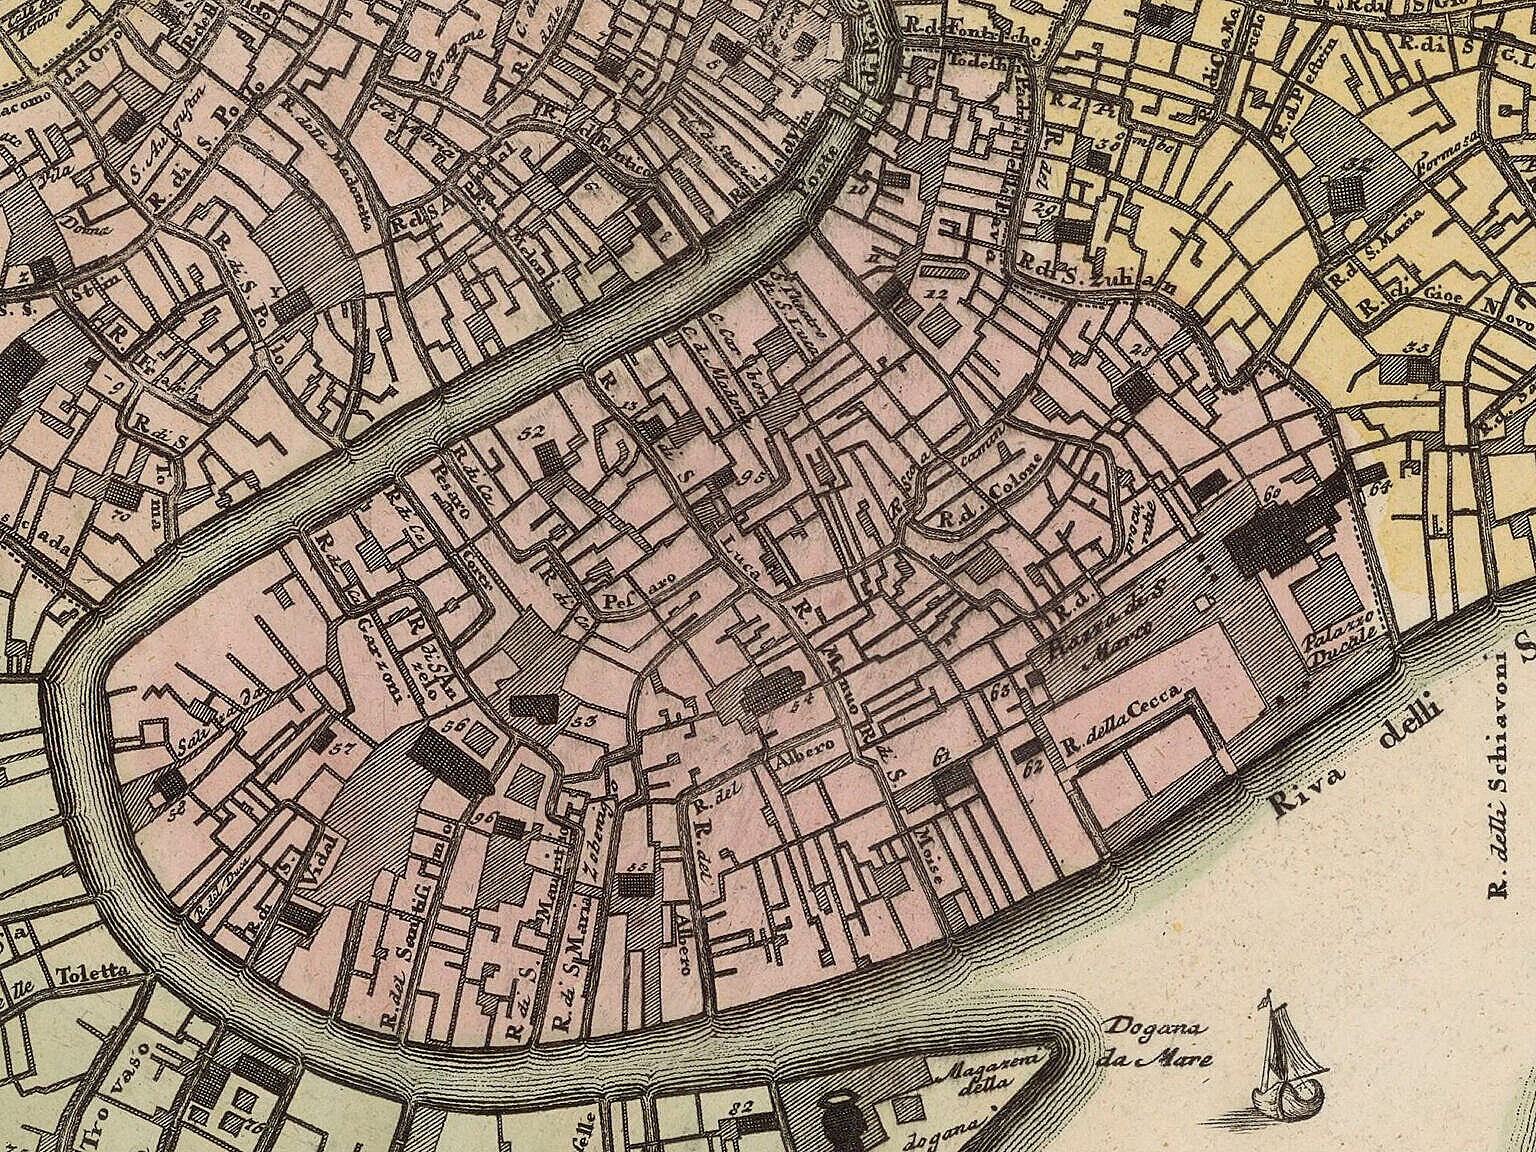 The Sestiere San Marco on a map from 1729